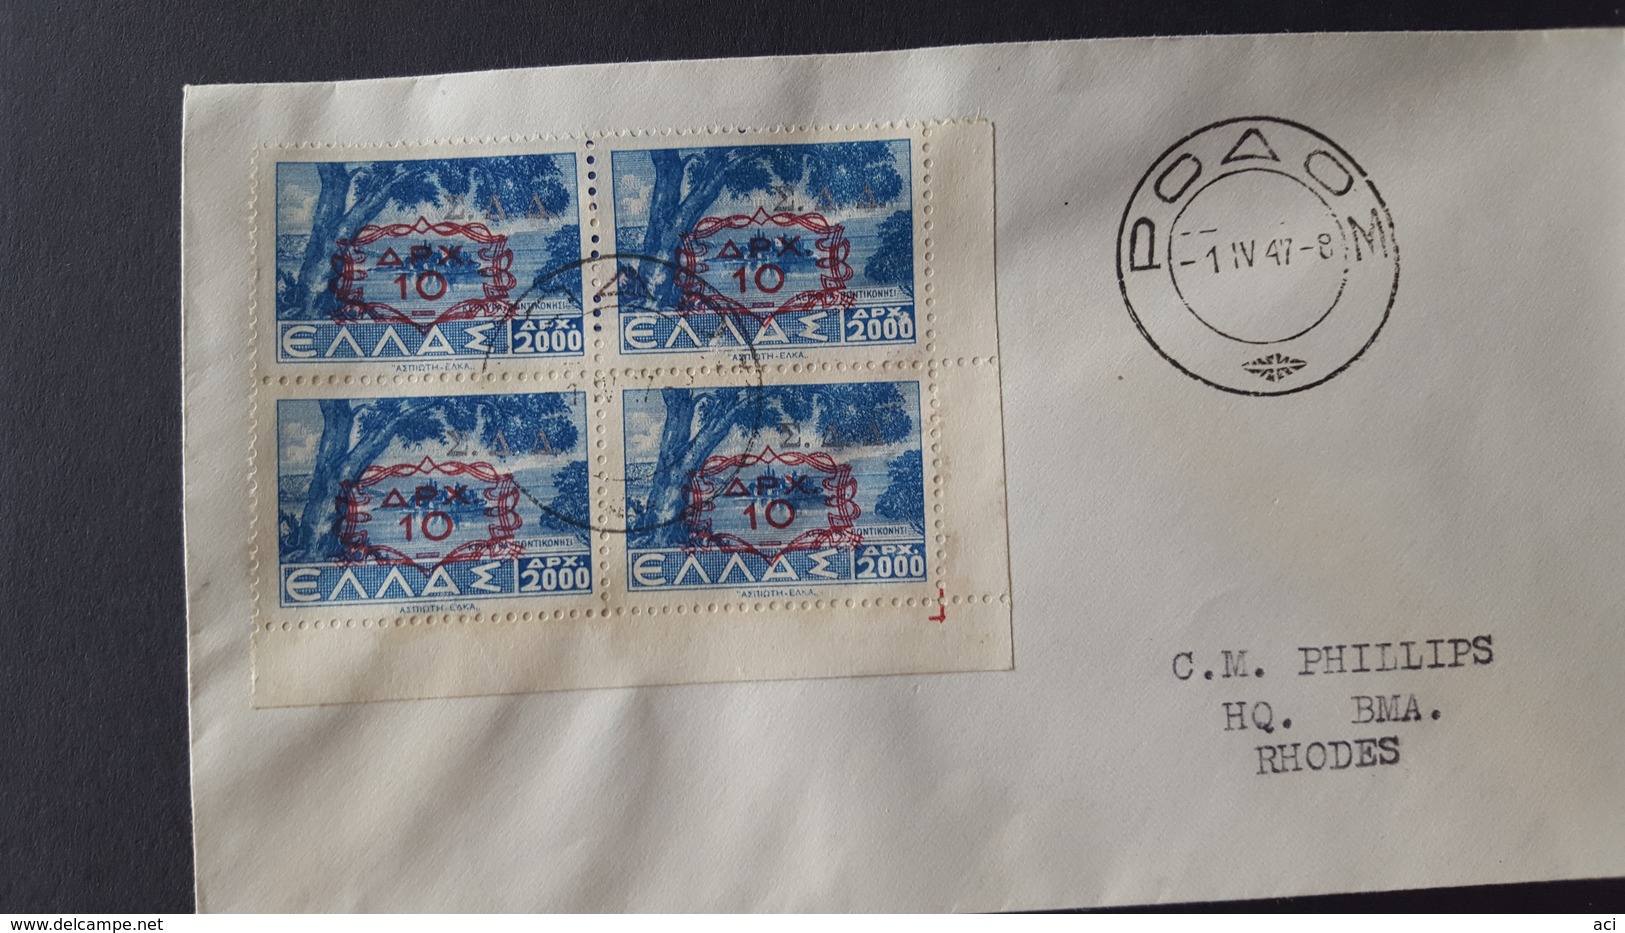 Greece 1947 10 APX On 2000 APX Block Of 4 FDC - Covers & Documents